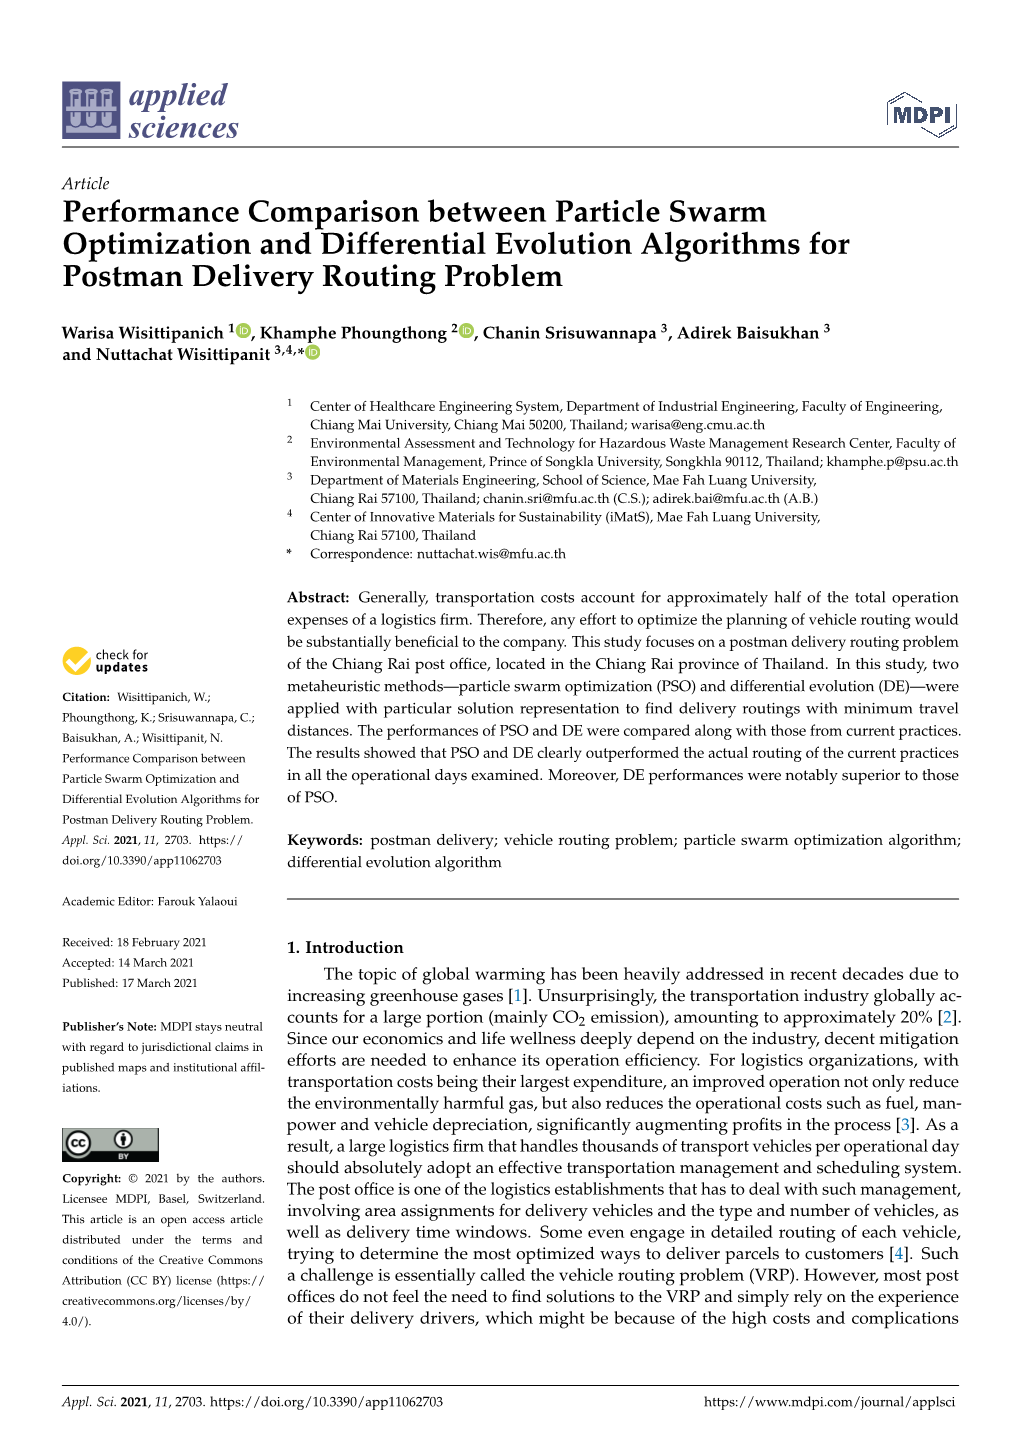 Performance Comparison Between Particle Swarm Optimization and Differential Evolution Algorithms for Postman Delivery Routing Problem